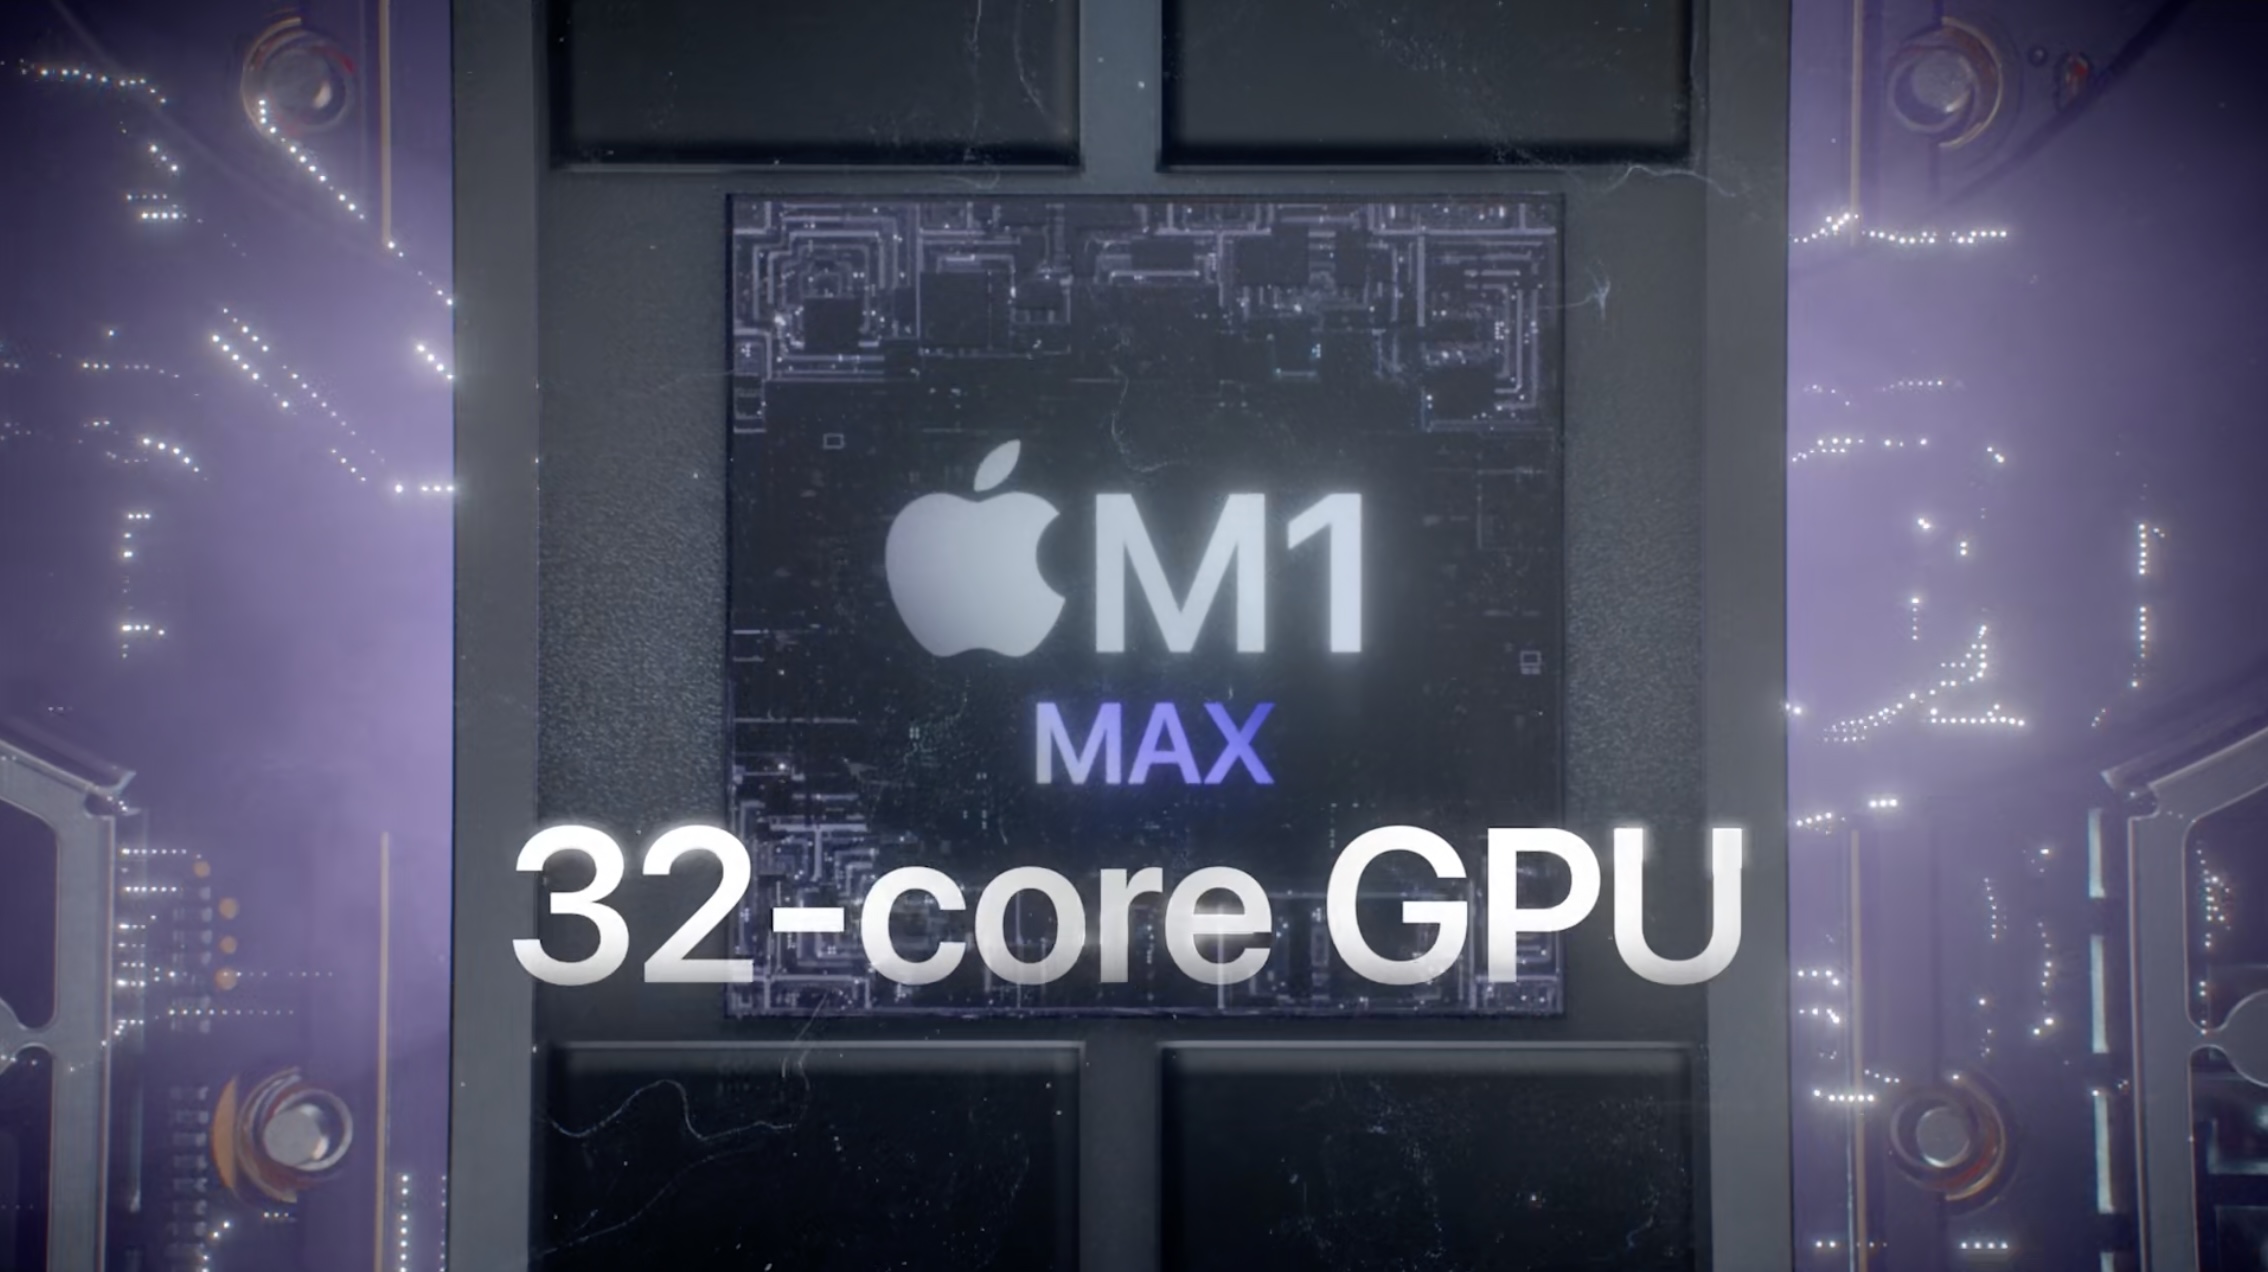 M1 Max offers up to 181% faster graphics than previous 16-inch MacBook Pro  - 9to5Mac